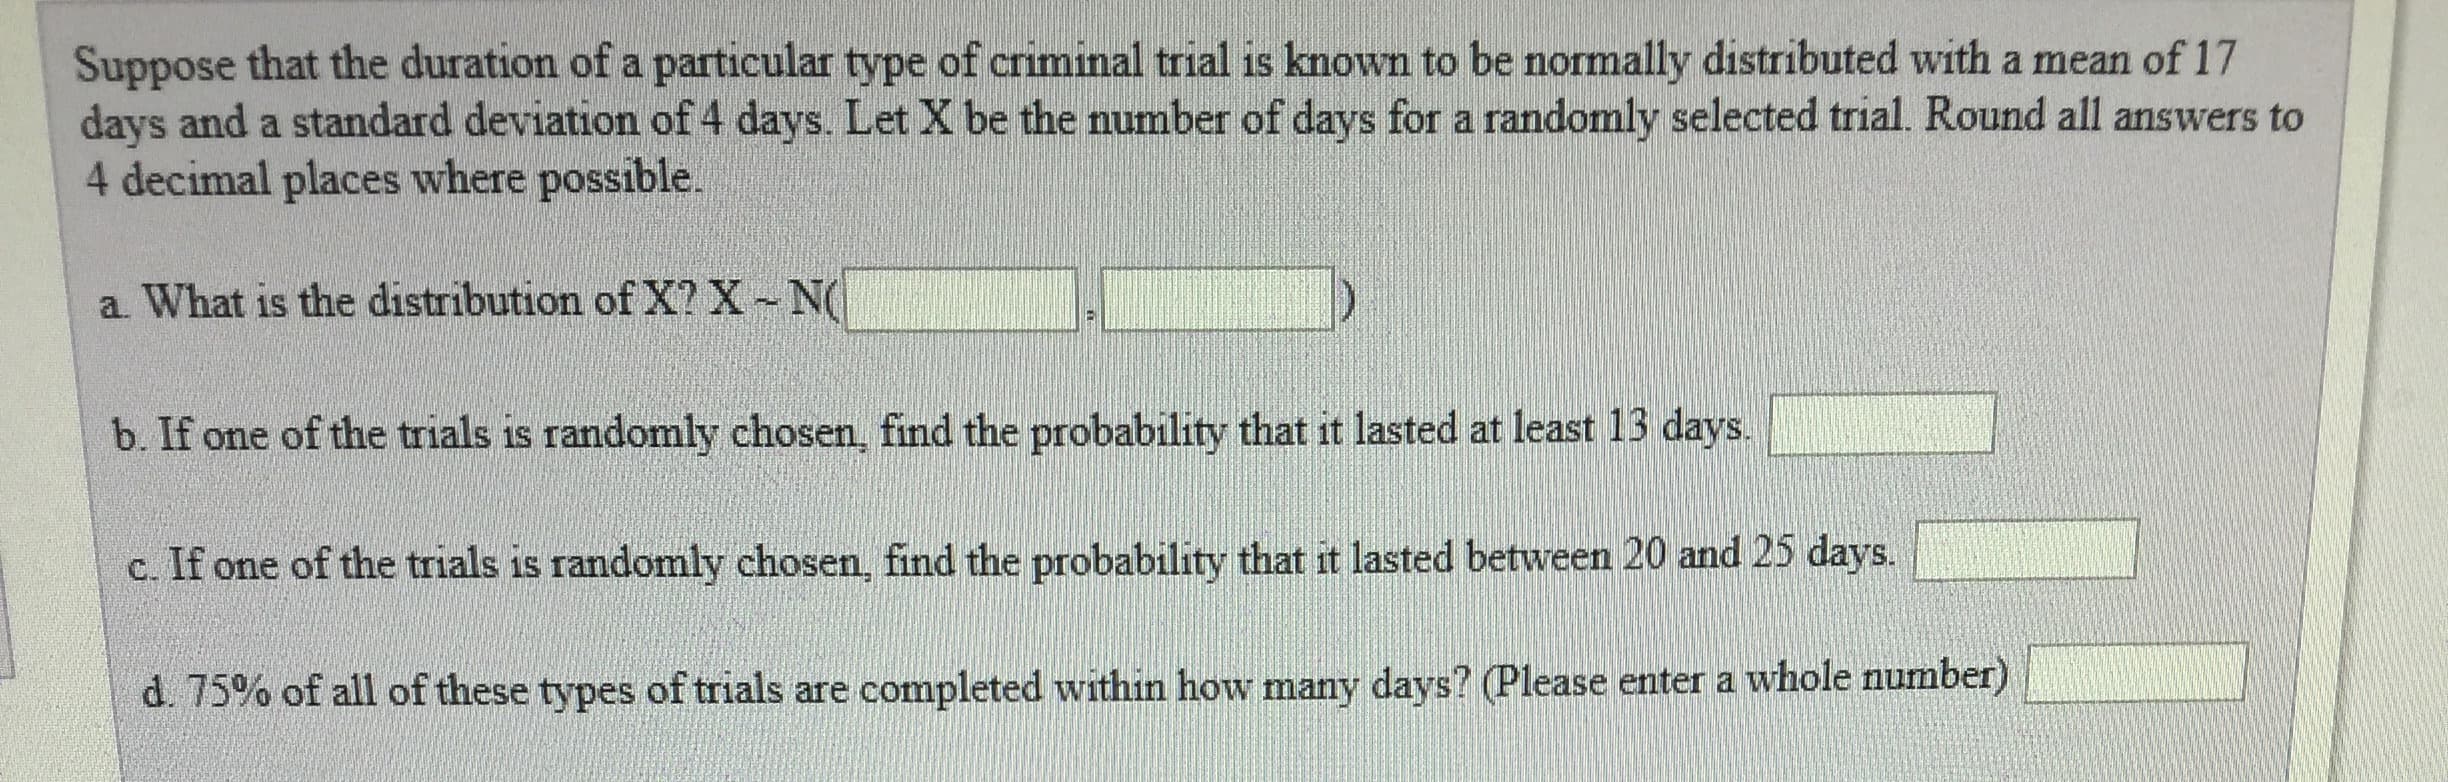 Suppose that the duration of a particular type of criminal trial is known to be normally distributed with a mean of 17
days and a standard deviation of 4 days. Let X be the number of days for a randomly selected trial. Round all answers to
4 decimal places where possible.
a. What is the distribution of X? XN
b. If one of the trials is randomly chosen, find the probabiy ahat it lasted at east 13 days
c. If one of the trials is randomly chosen, find the probability that it lasted between 20 and 25 days
d 75% of all of these types of trials are completed within how many days? Please enter a whole number)
